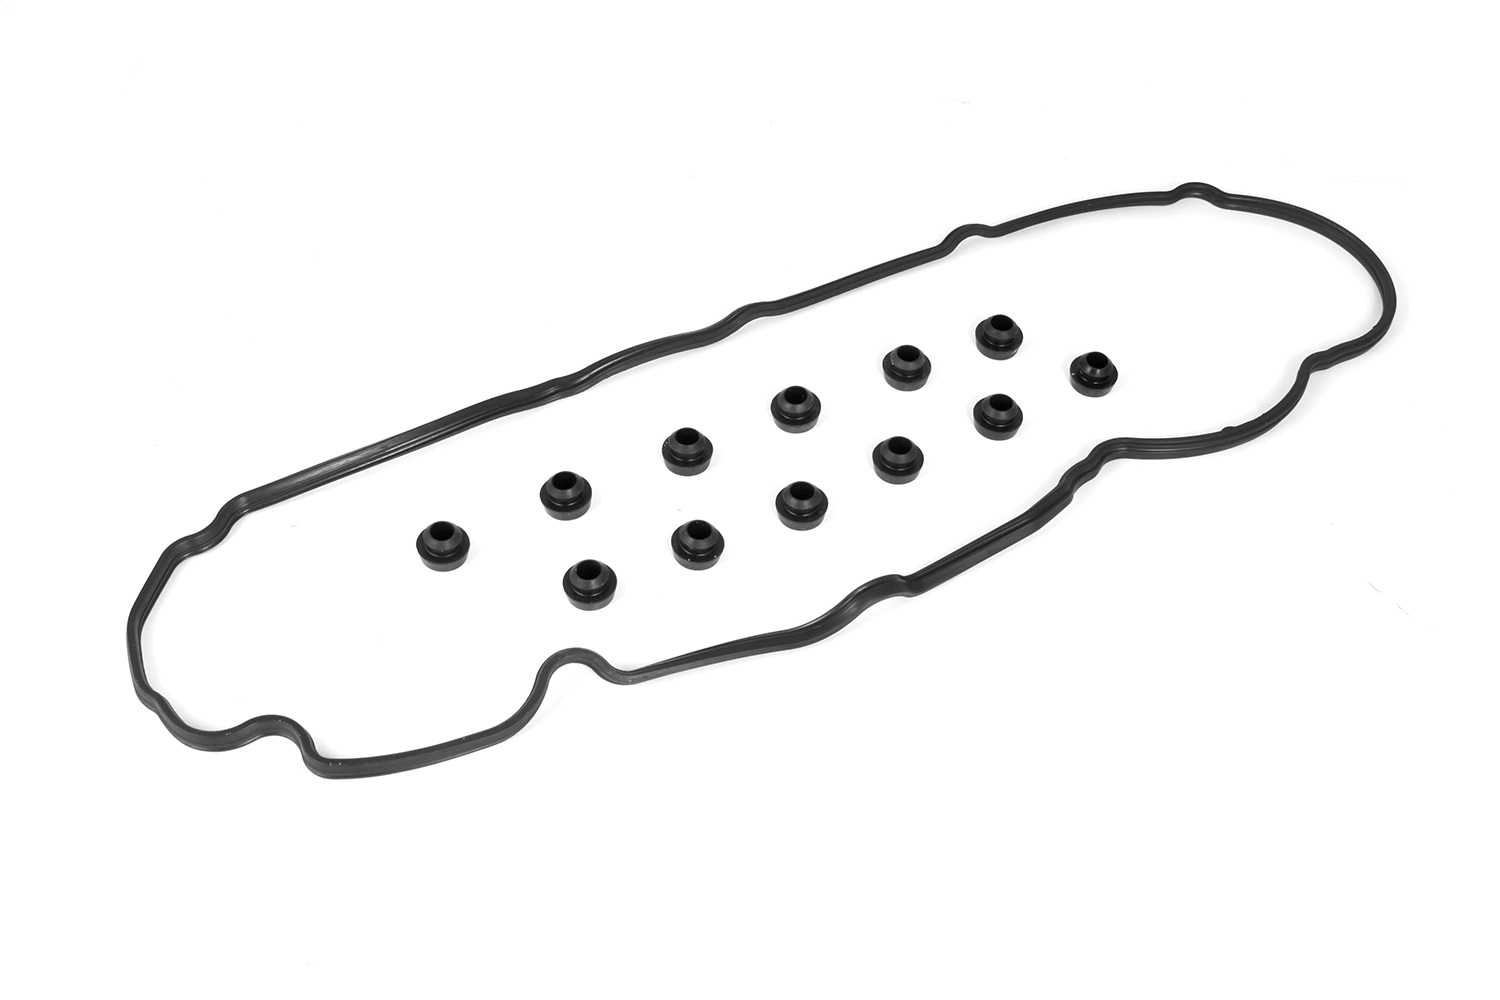 Jeep Omix Valve Cover Gasket, Left, 3.7L, 05-12 Liberty, 05-10 Grand Cherokee, 06-10 Commander,